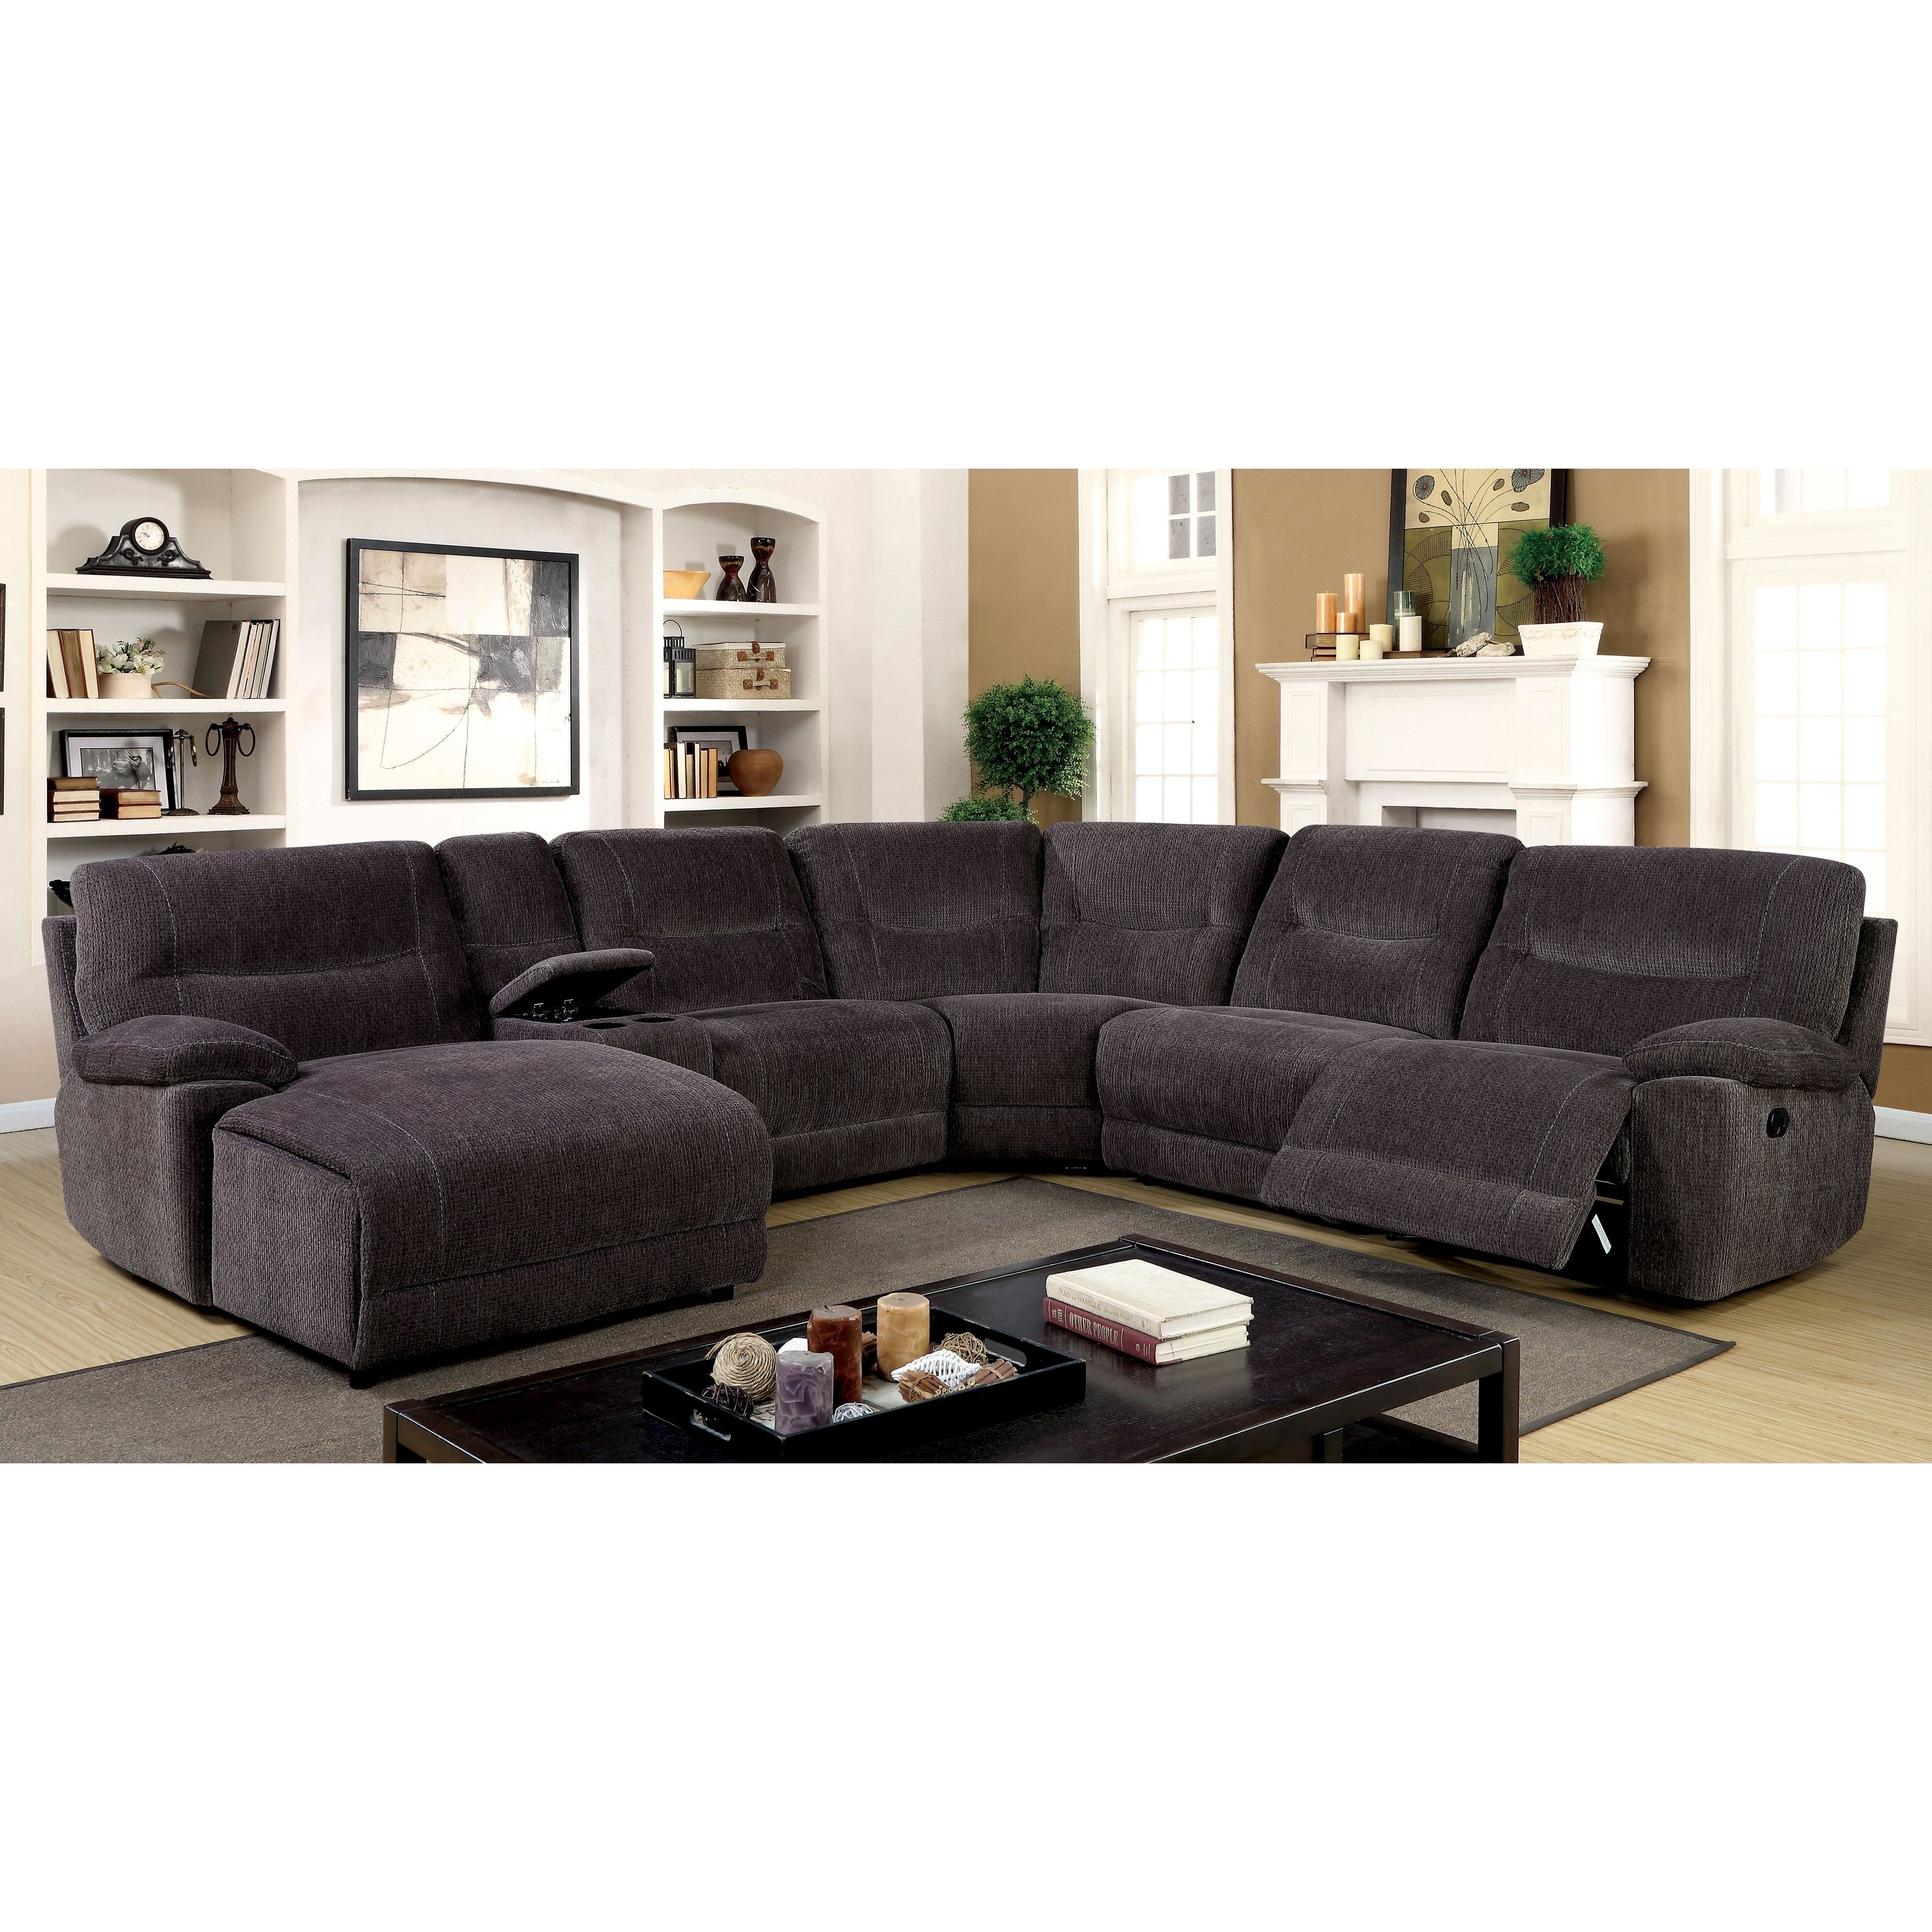 Furniture Of America Colen Reclining Chenille Fabric Grey L Shaped With Johnson City Tn Sectional Sofas (View 6 of 10)